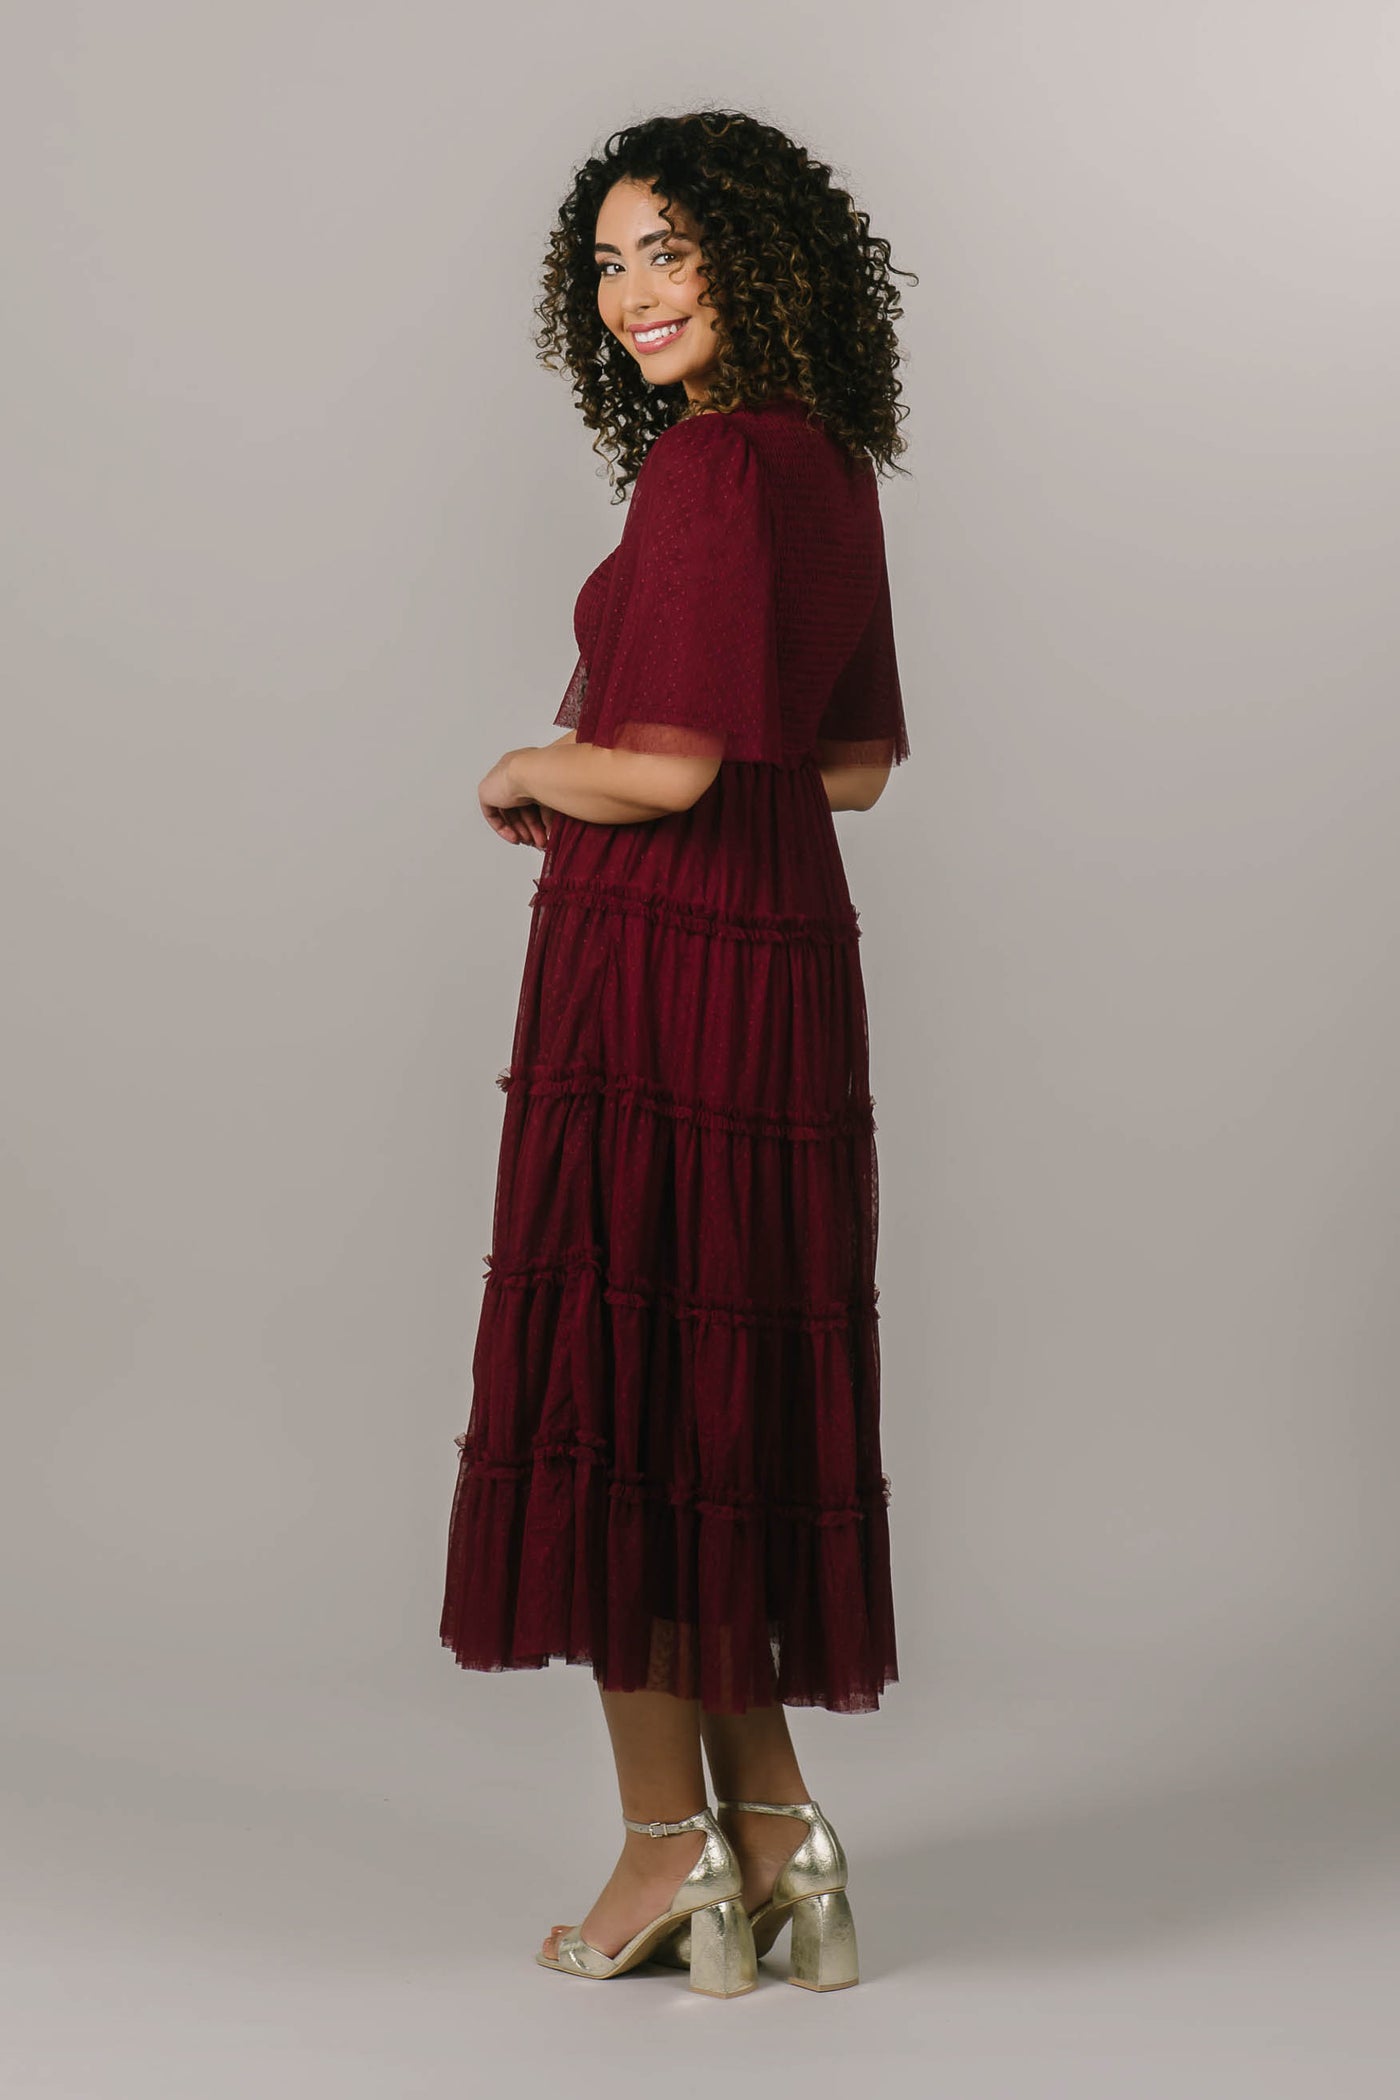 This modest dress is perfect for a bride looking for a burgundy bridesmaid dress.